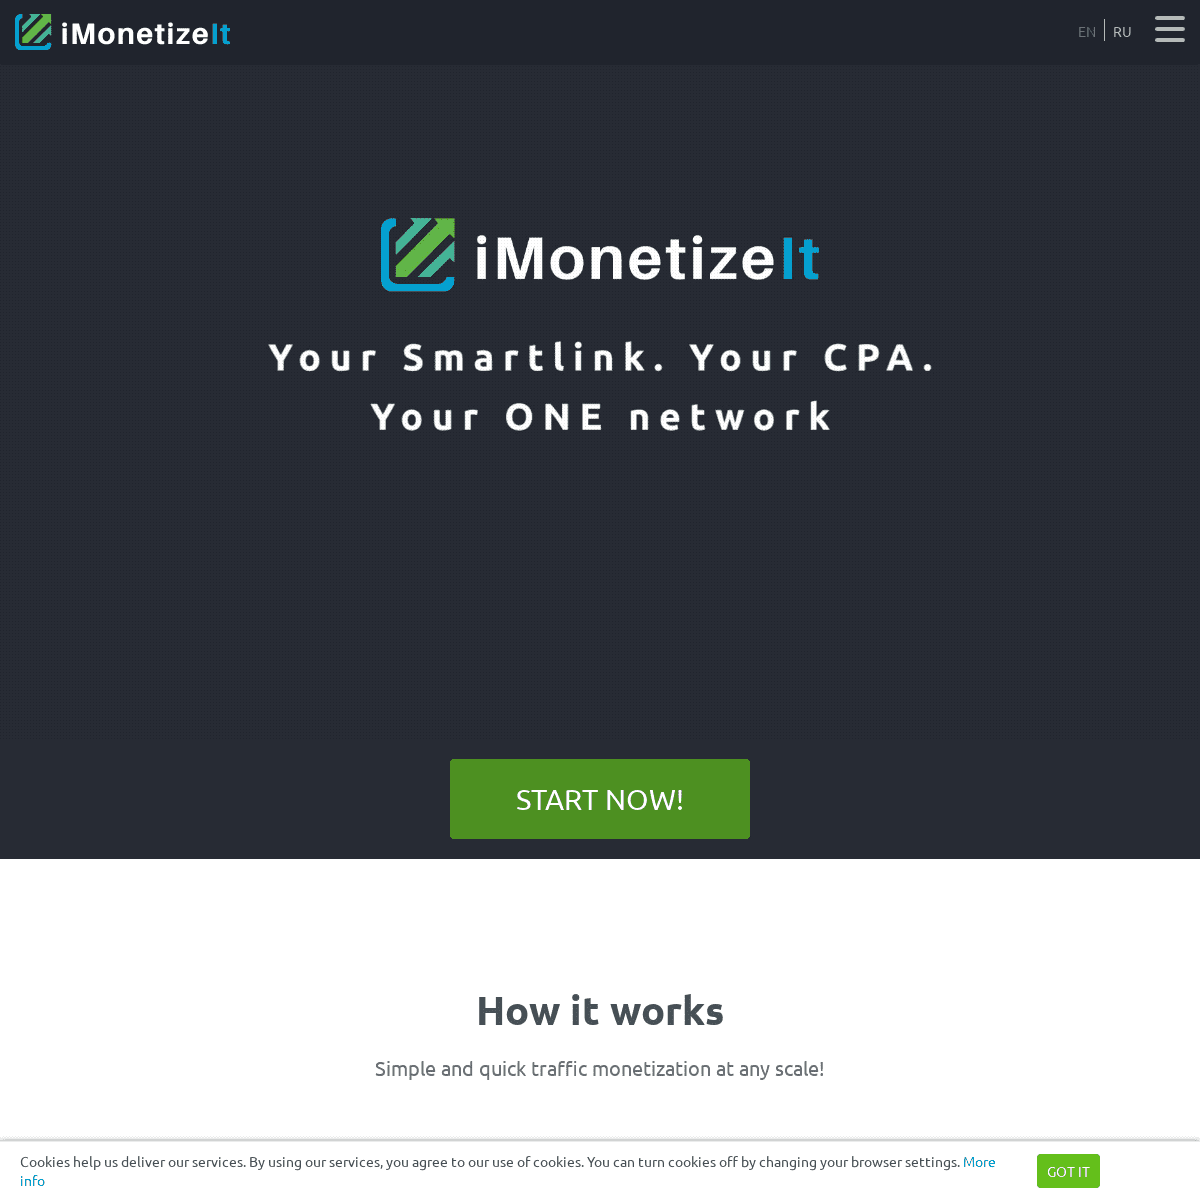 A complete backup of imonetizeit.com